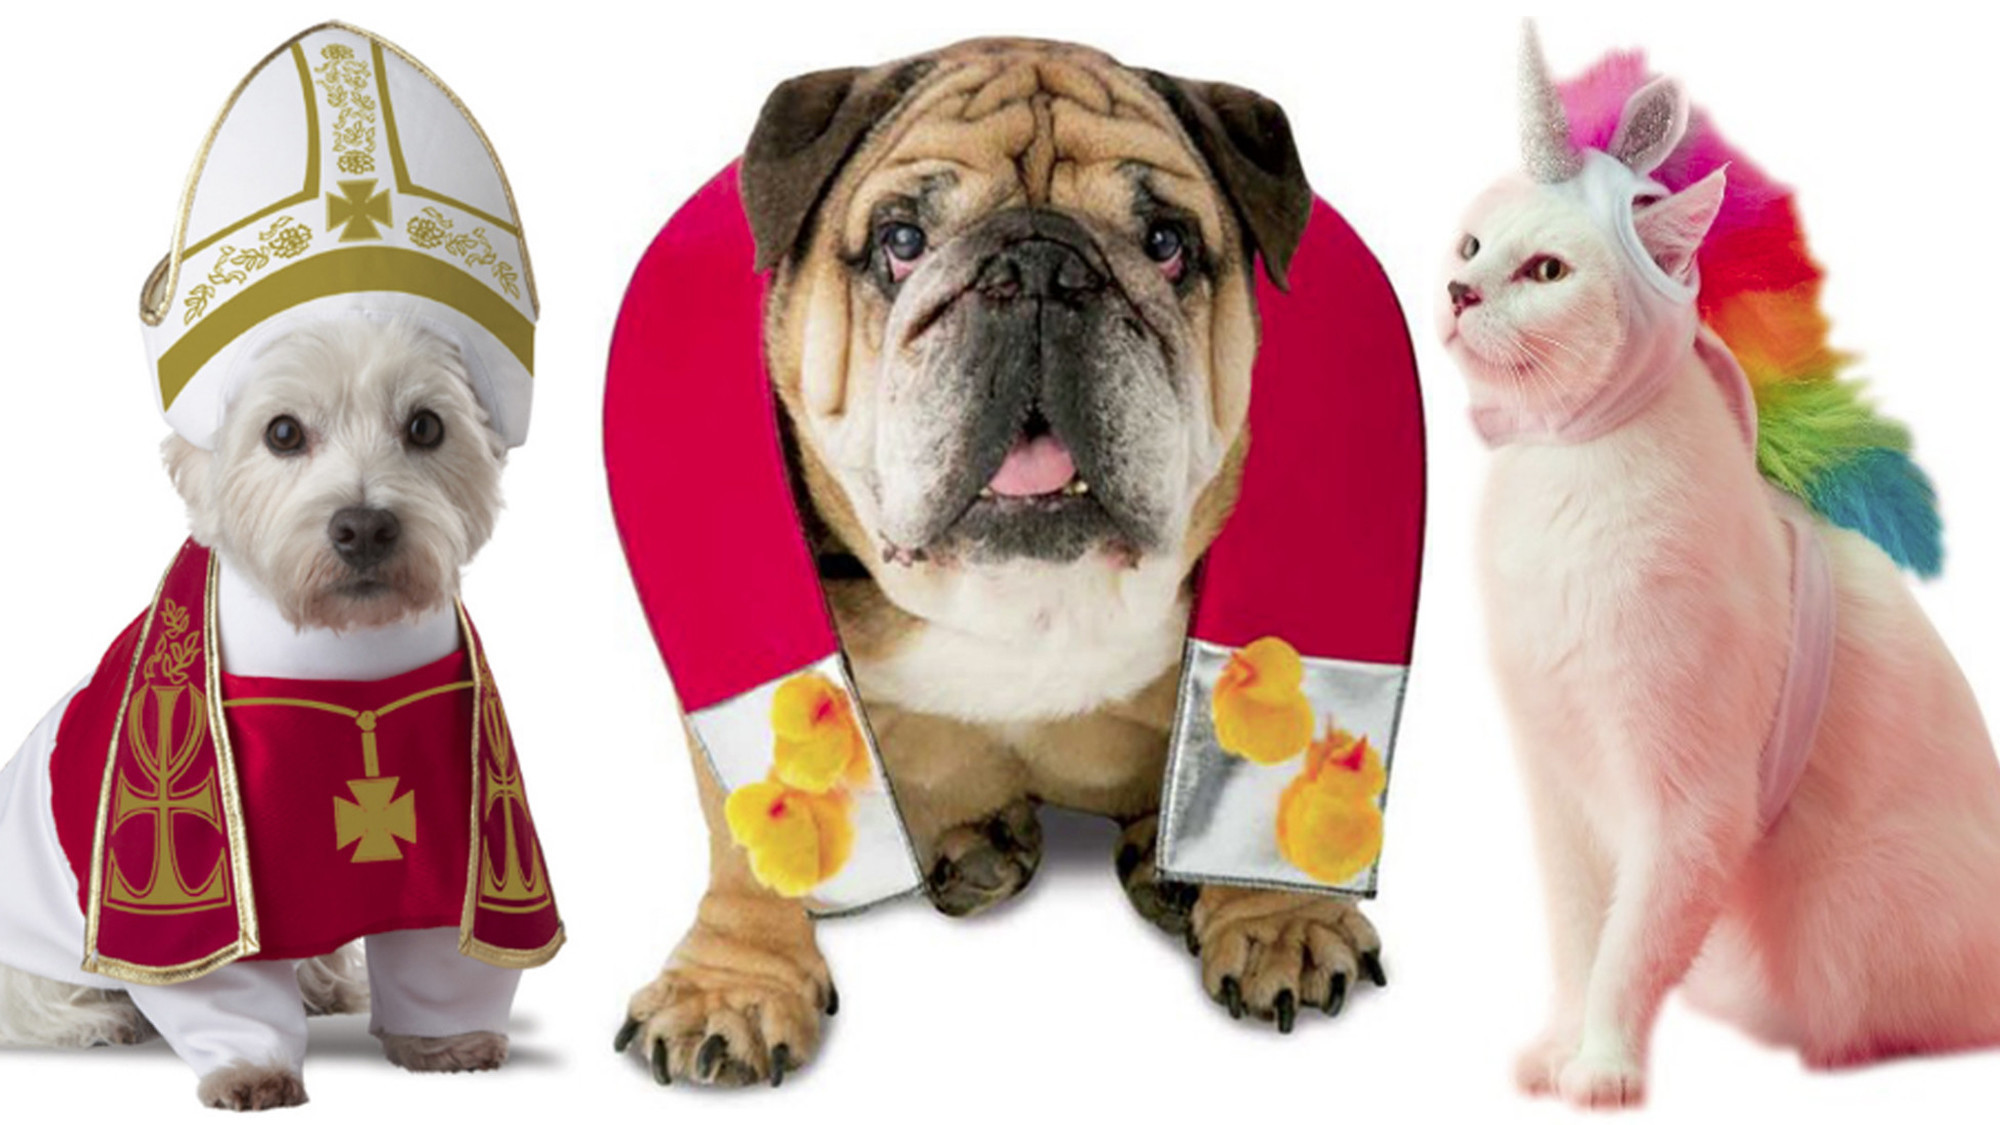 20 hilarious Halloween costumes for pets - Chicago Tribune